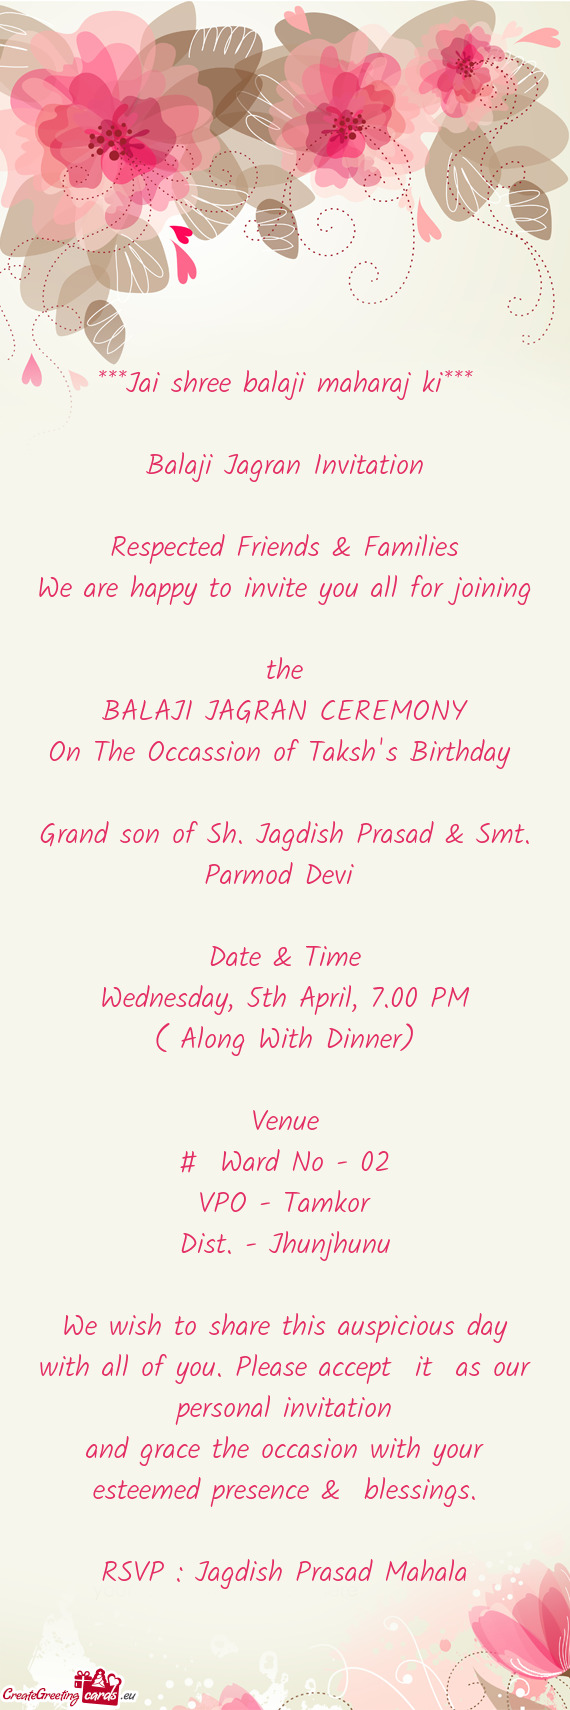 On The Occassion of Taksh's Birthday